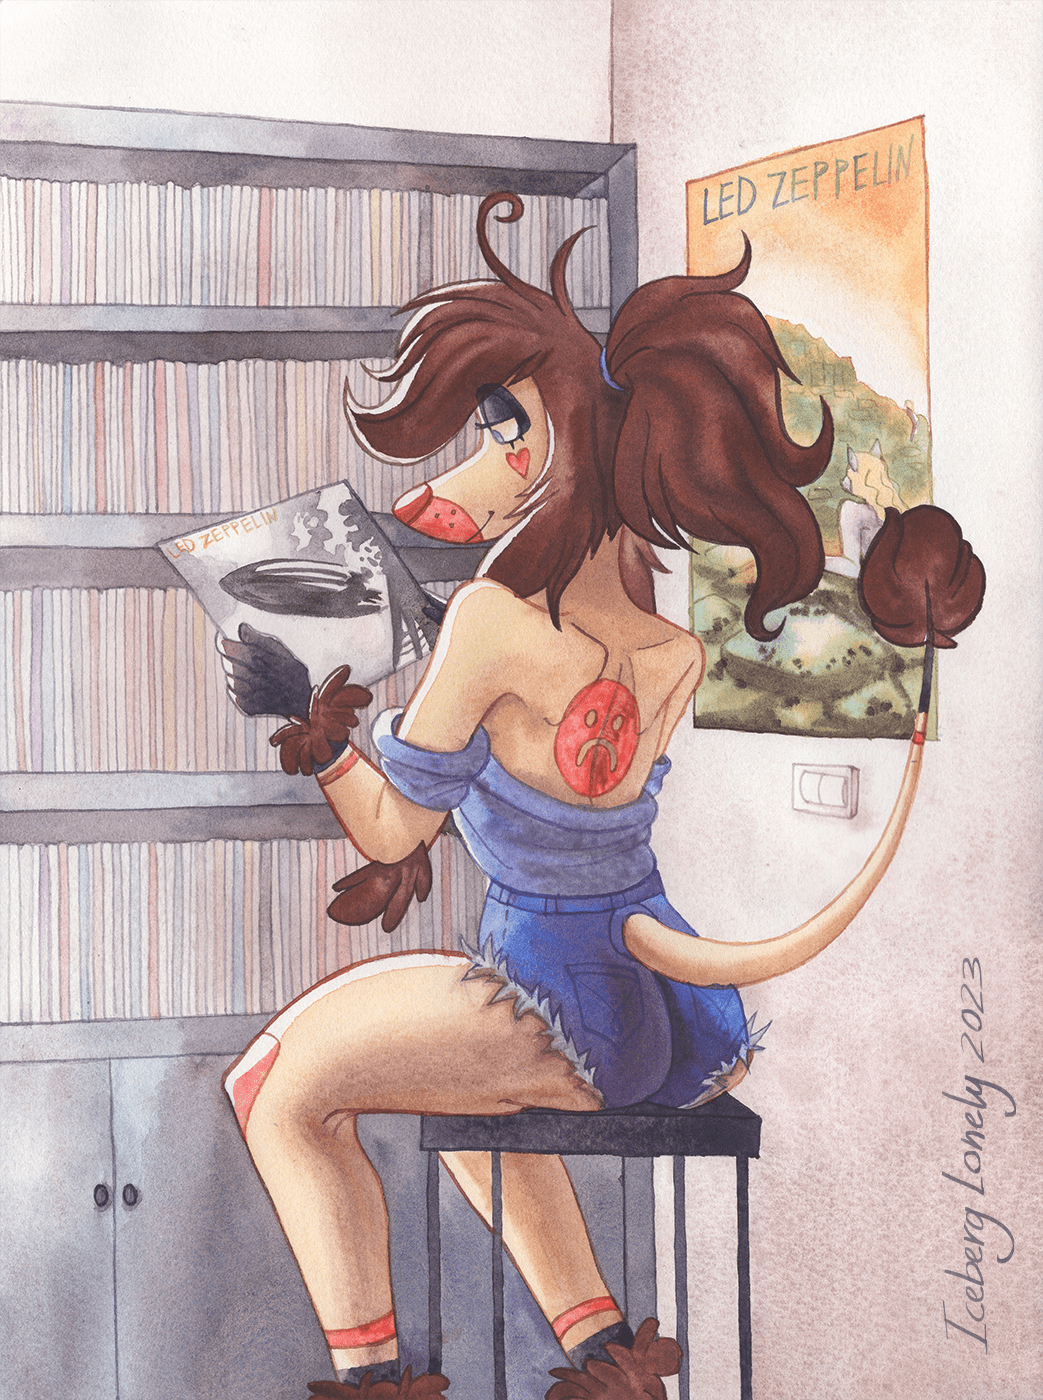 anthro book illustration Character design  furry ILLUSTRATION  painting   TRADITIONAL ART Vinyl Cover vinyl record watercolor